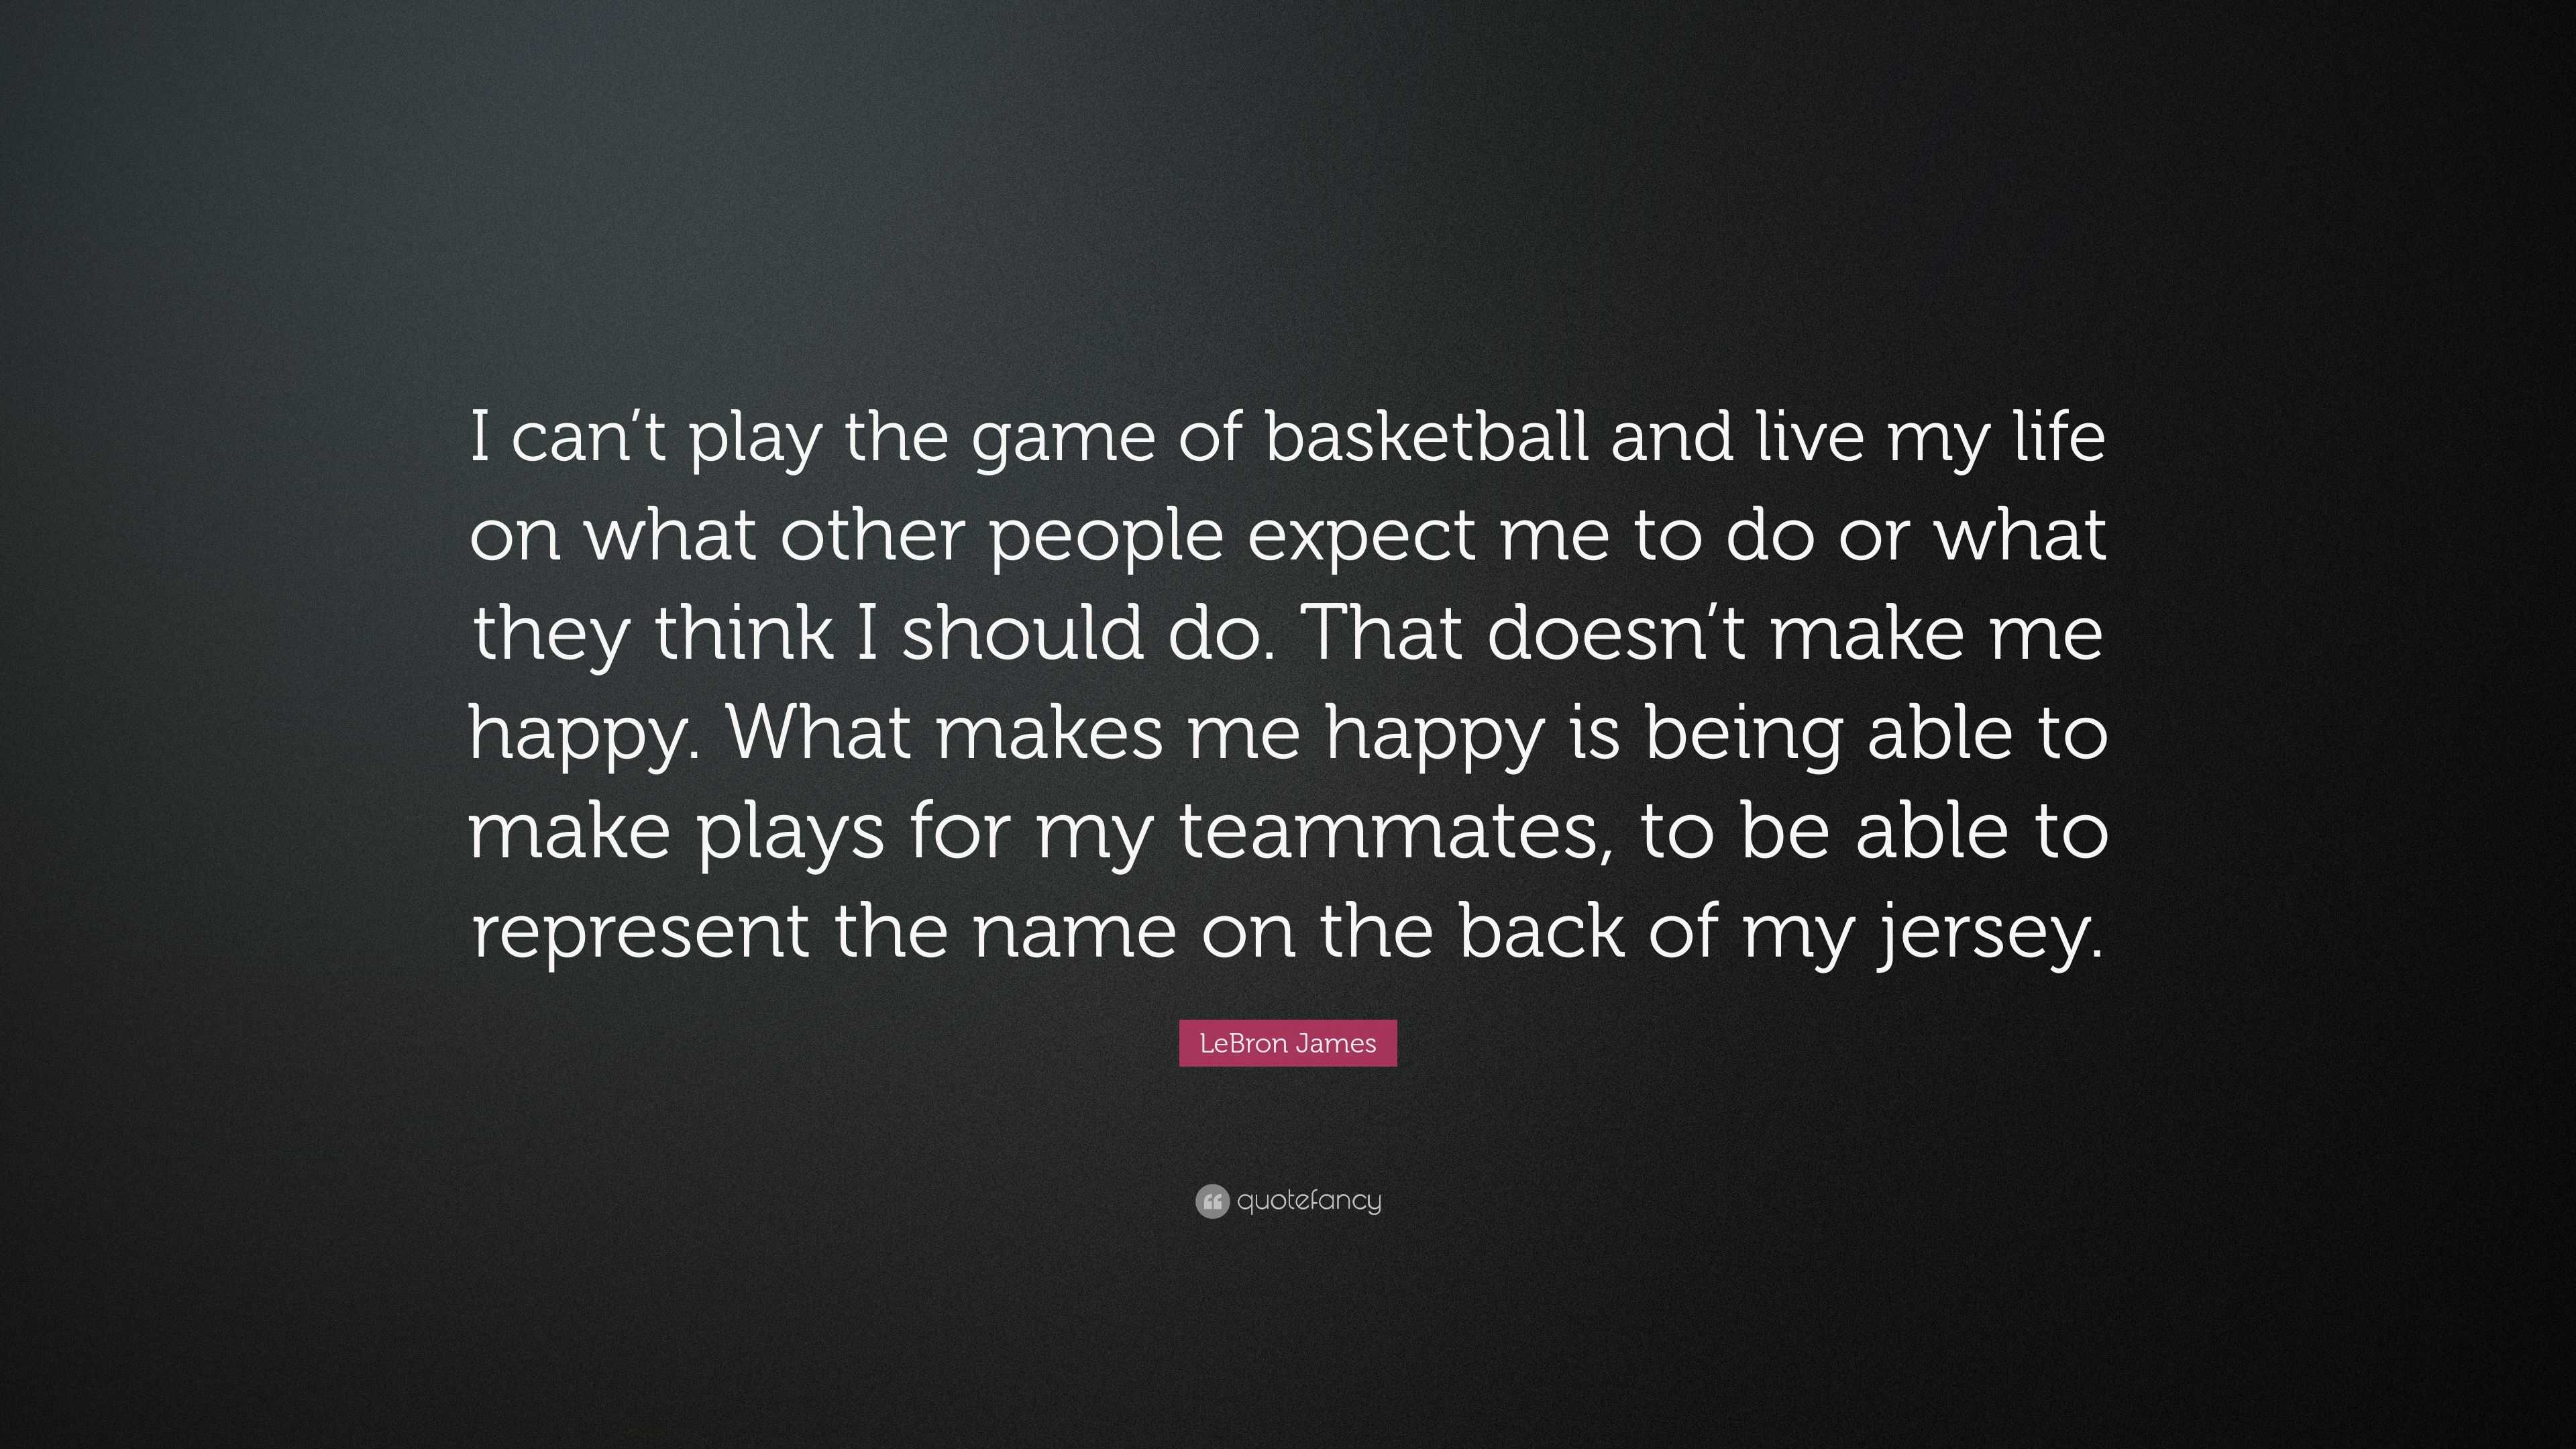 Lebron James Quote I Can T Play The Game Of Basketball And Live My Life On What Other People Expect Me To Do Or What They Think I Should Do 7 Wallpapers